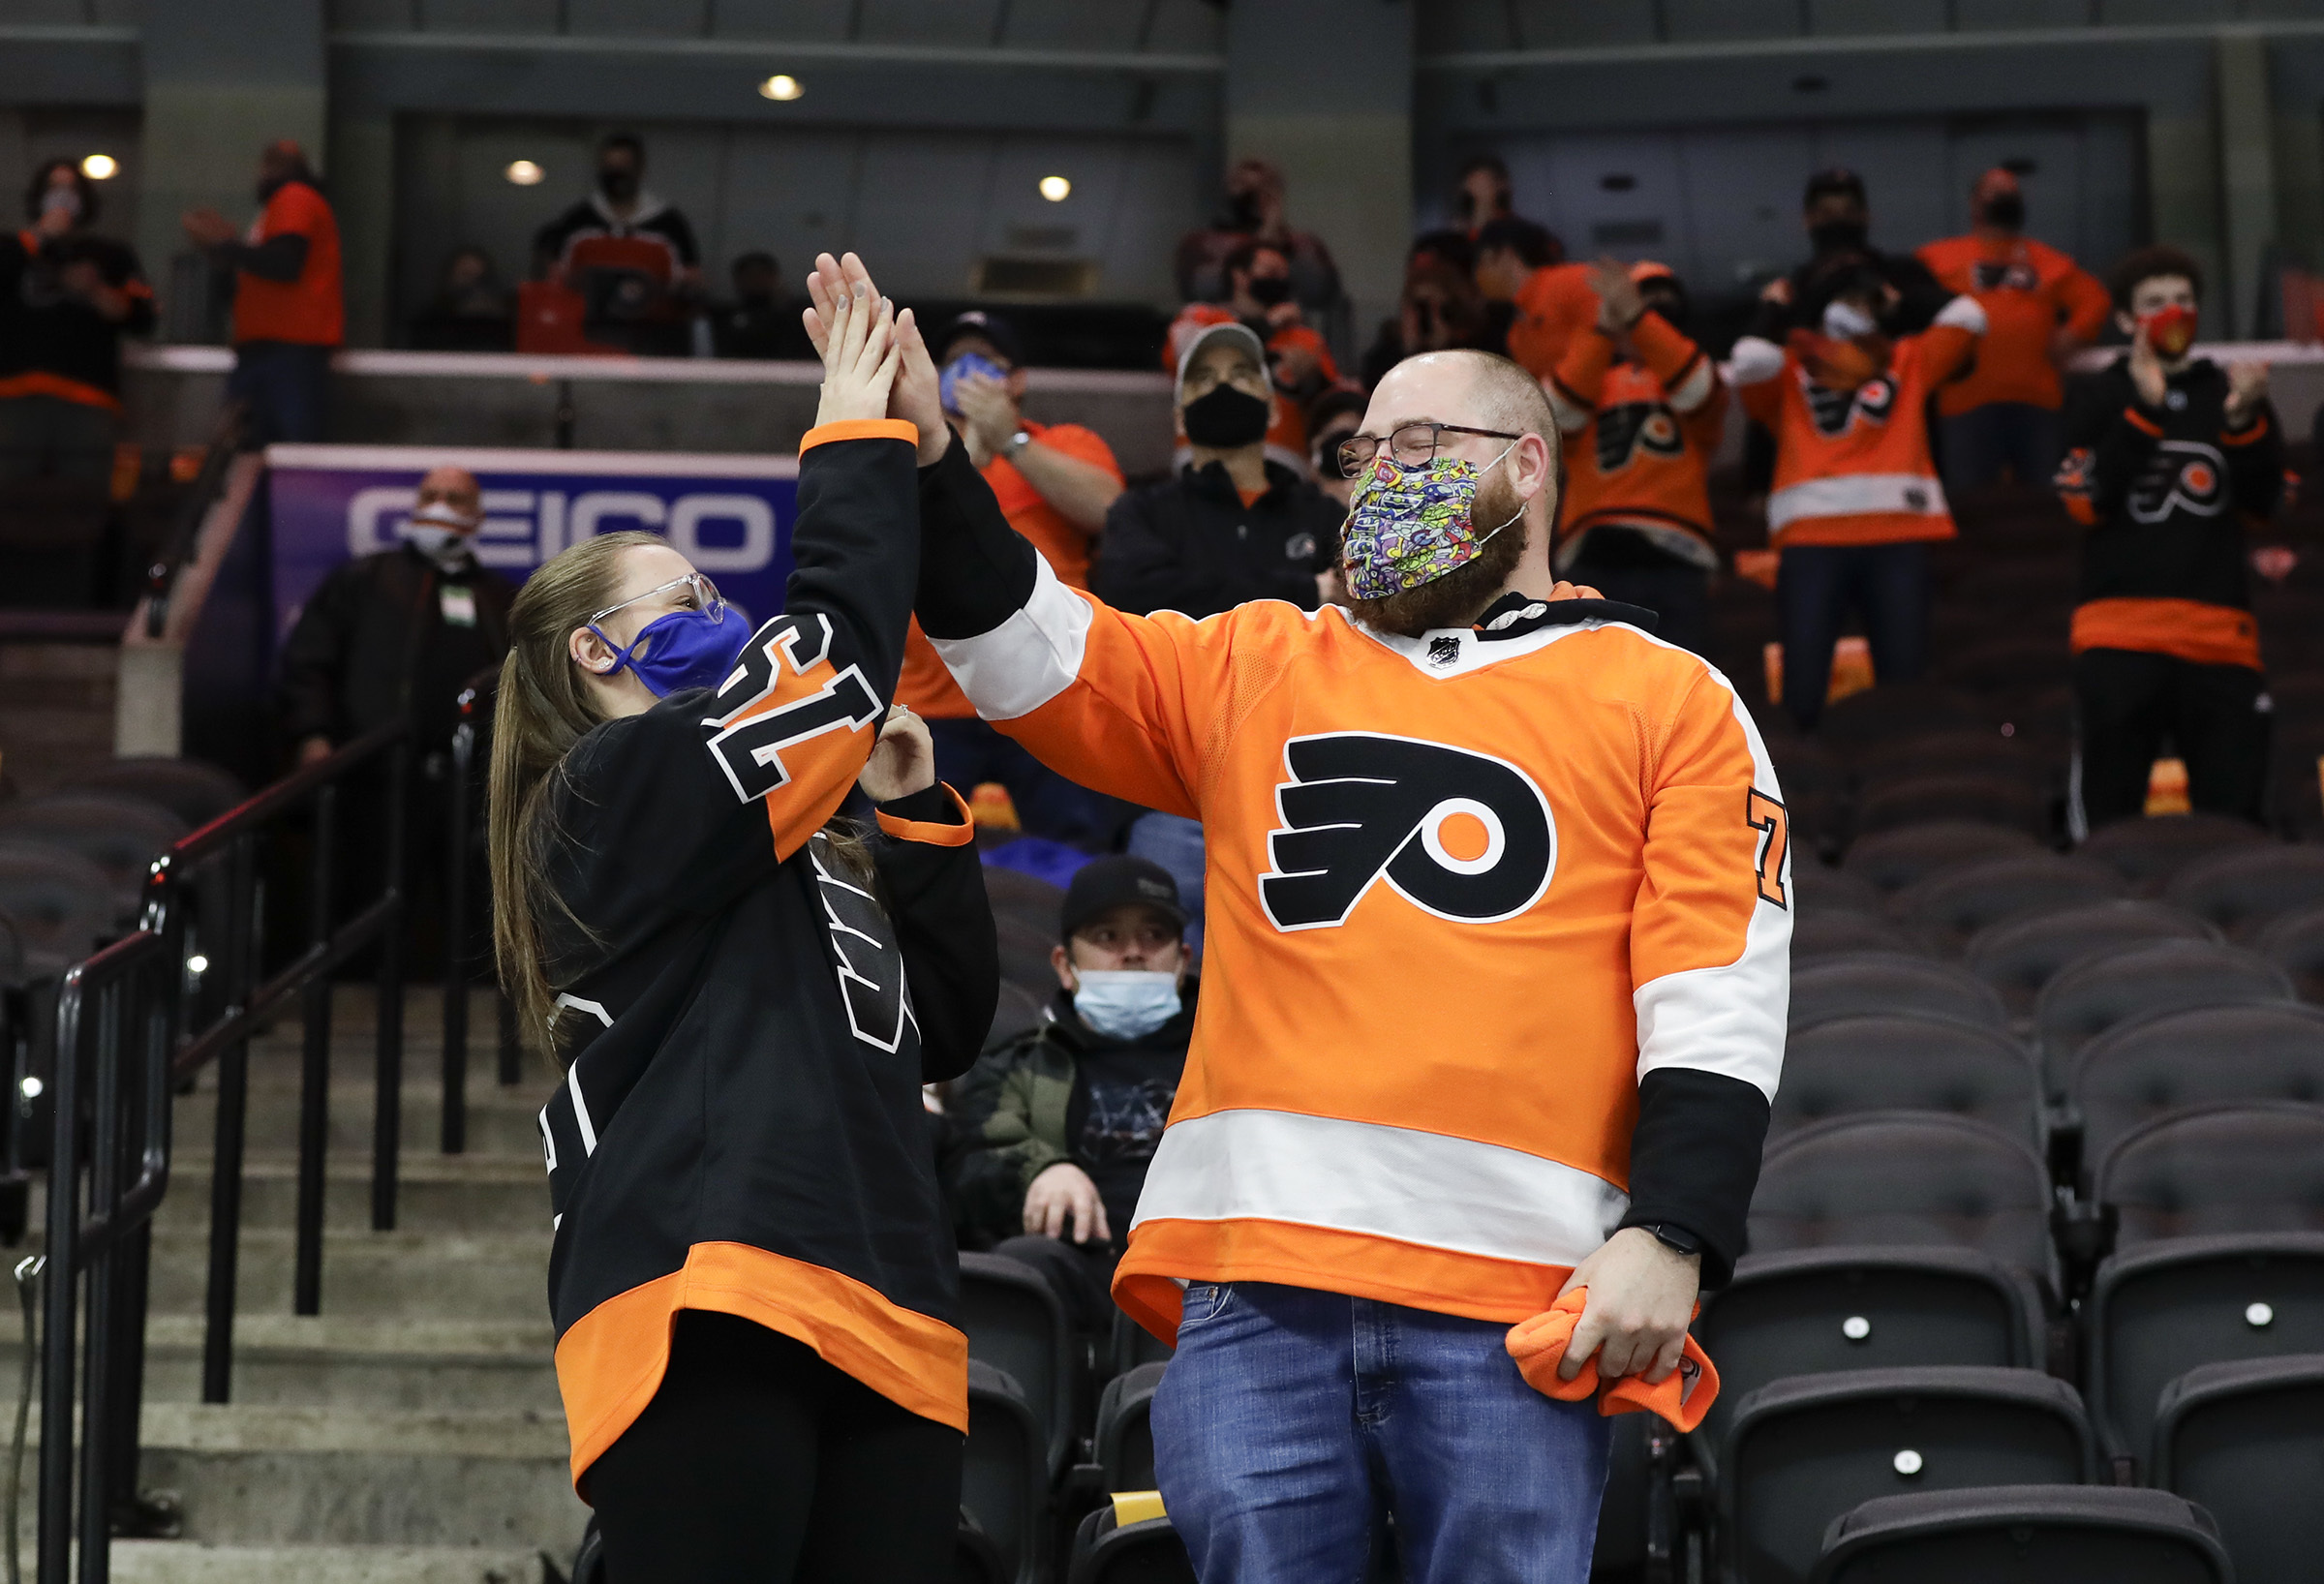 Philadelphia Flyers - 50th anniversary jerseys are now available  exclusively at our FanZone store at the Wells Fargo Center. Get yours today  through September 10th from 10am – 6pm (9/6-9/8) & 10am – 3pm (9/9-9/10).